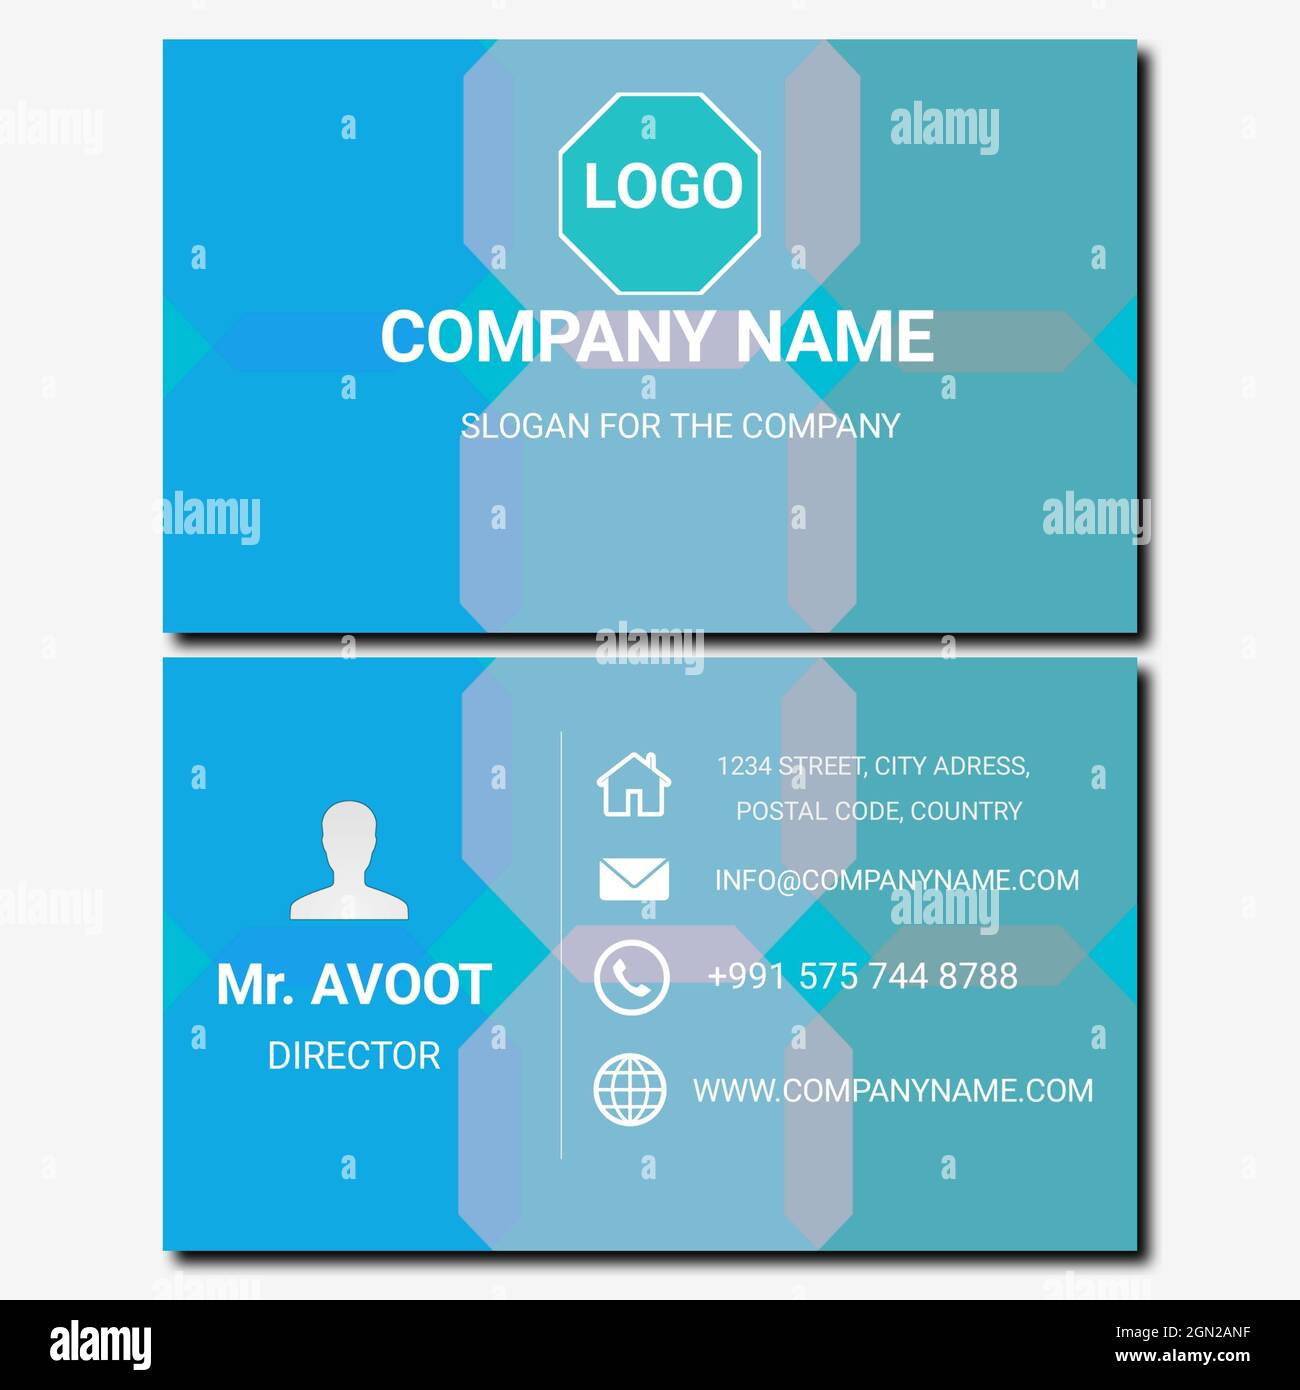 Professional business card template or visiting card set design for publishing, print and working or personal presentation Stock Photo